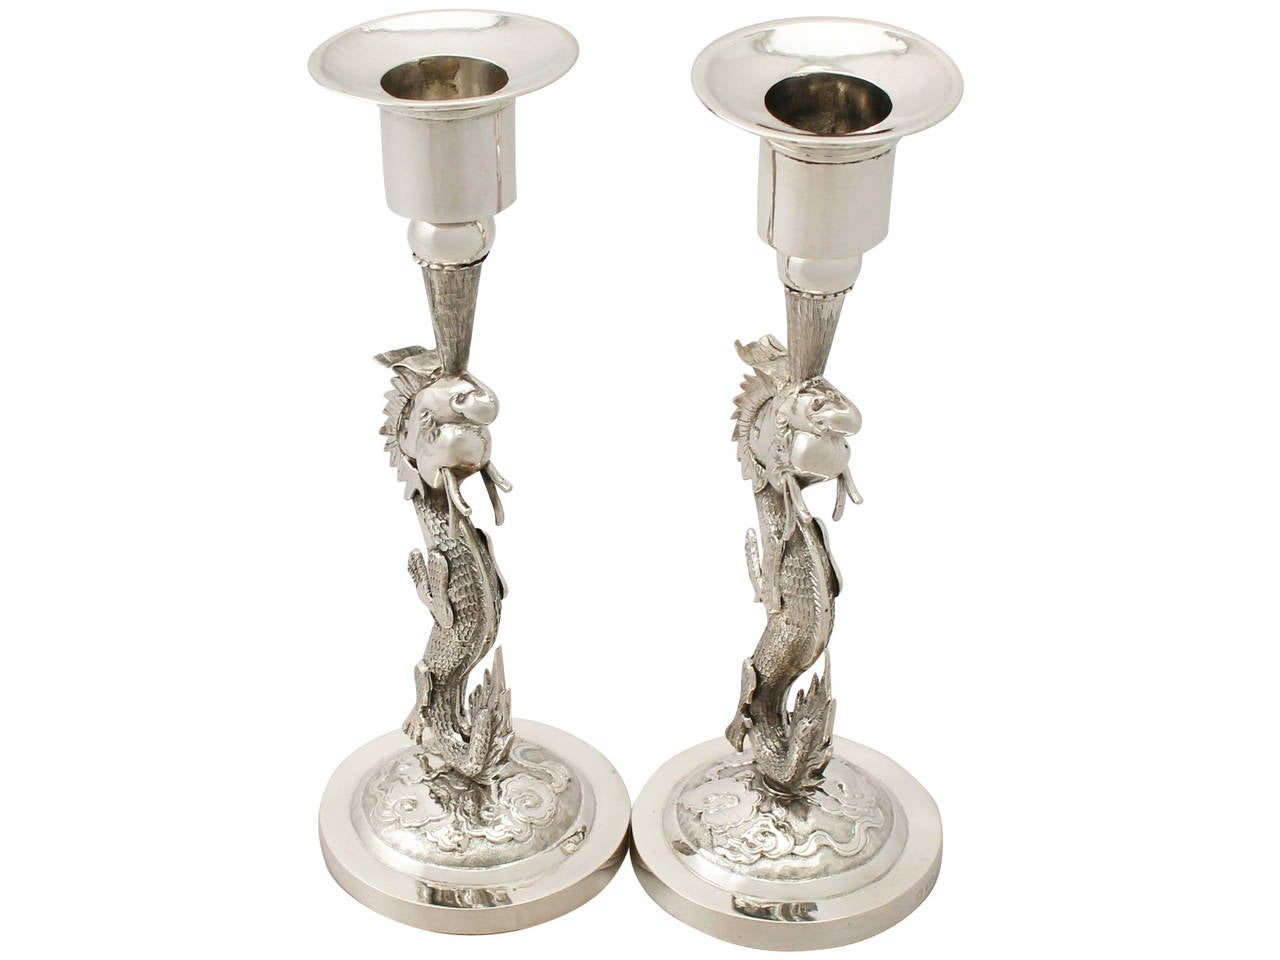 An exceptional, fine and impressive pair of antique Chinese Export silver dragon candlesticks; an addition to our ornamental silverware collection.

These fine antique Chinese Export silver (CES) candlesticks have been modelled in the form of a